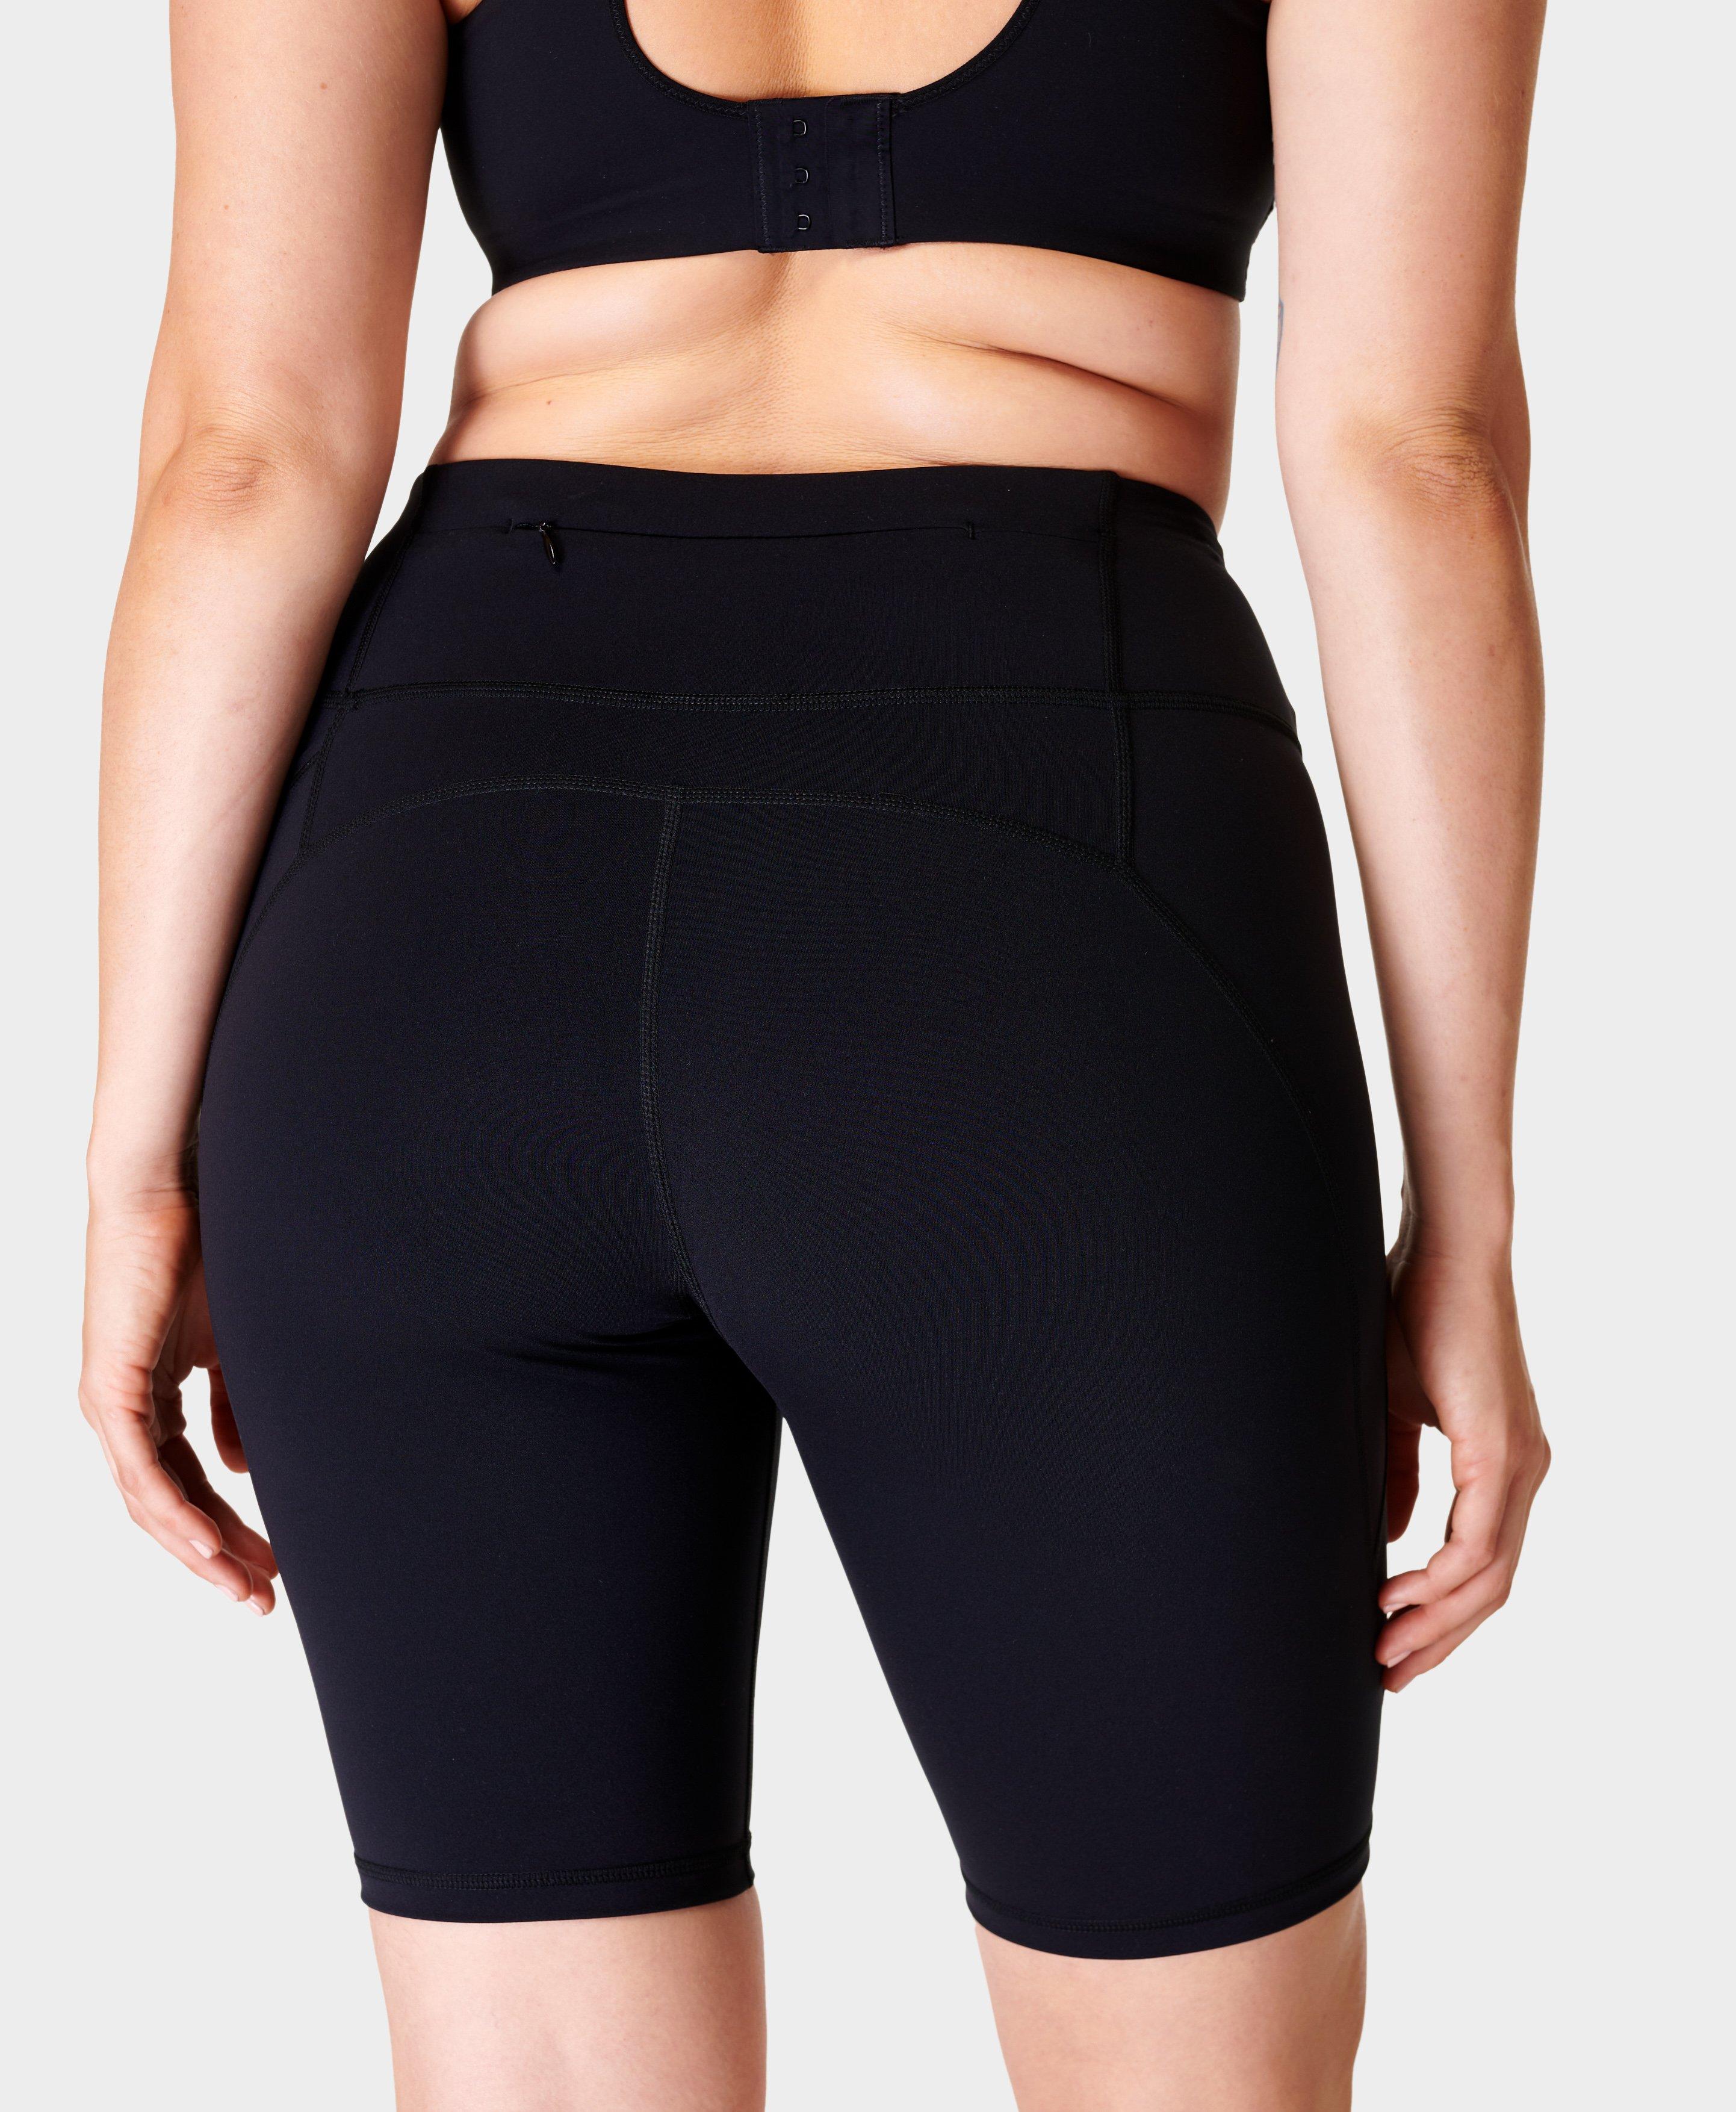 Buy Active Yoga Shorts, Fast Delivery